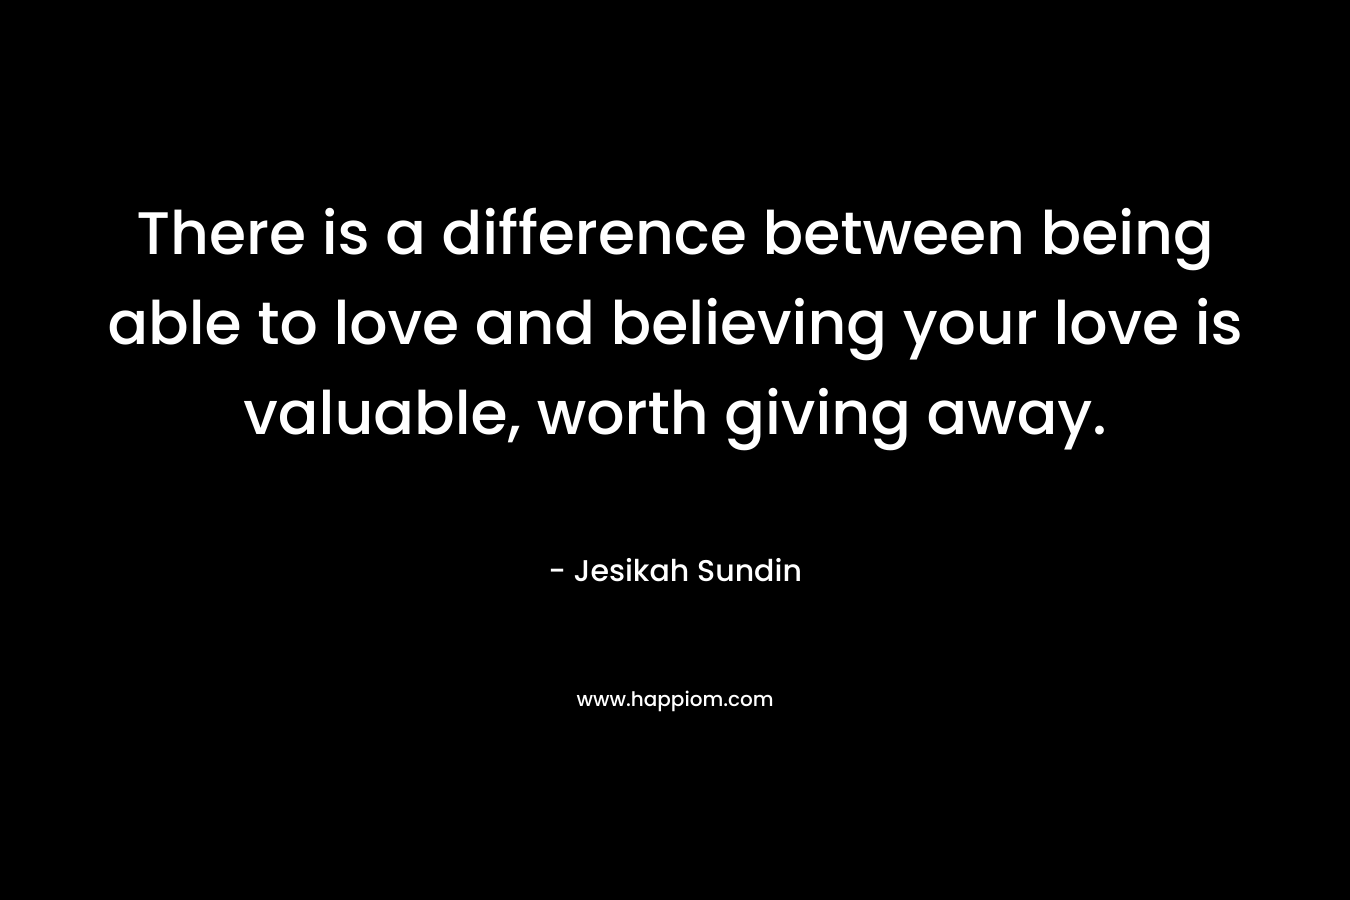 There is a difference between being able to love and believing your love is valuable, worth giving away.